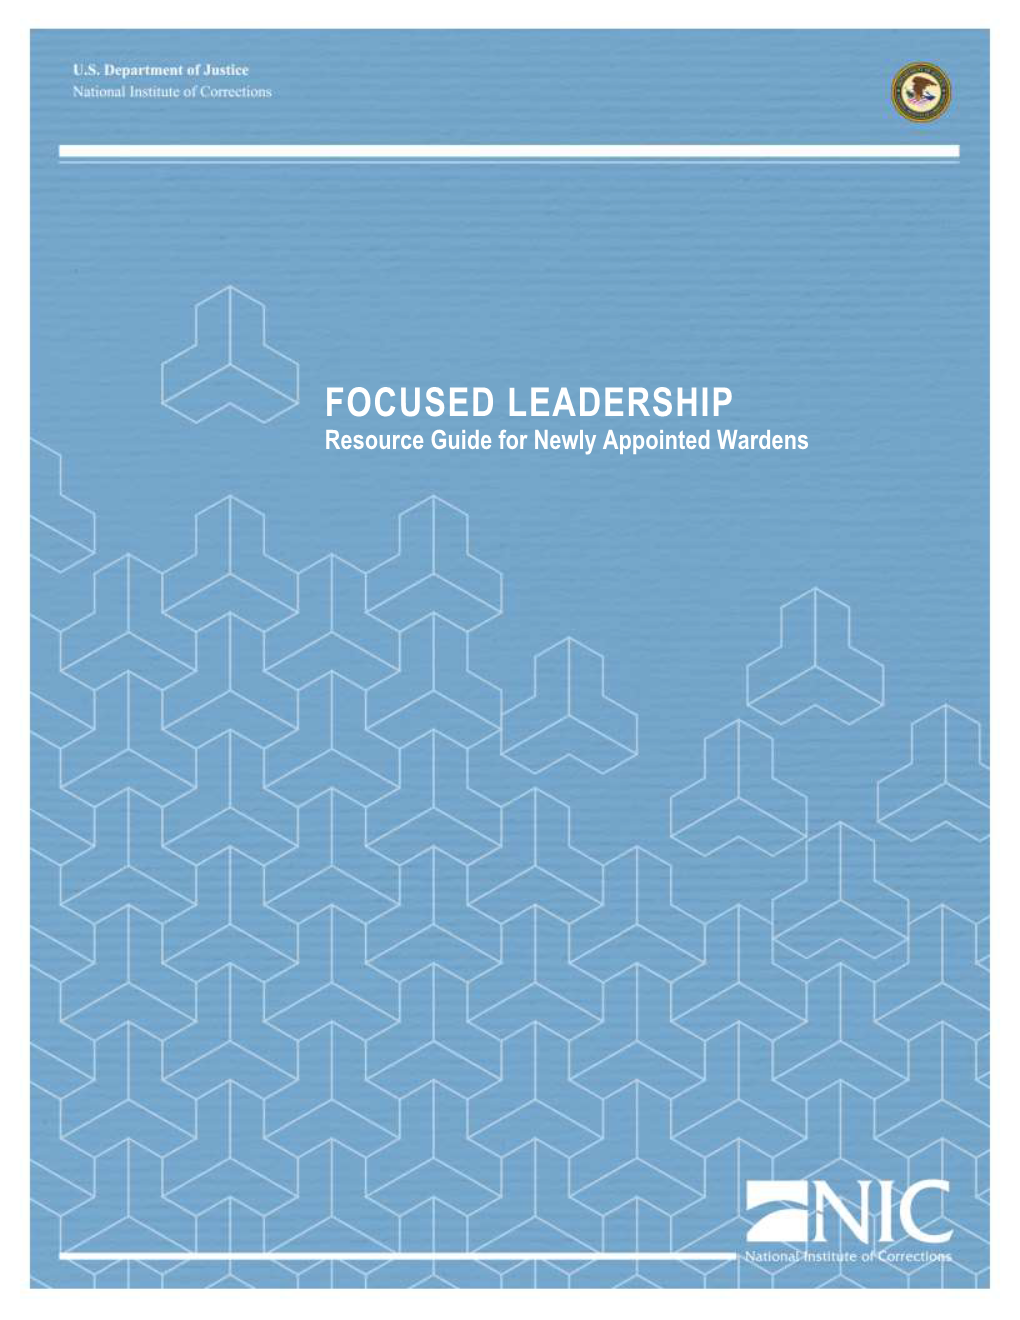 FOCUSED LEADERSHIP Resource Guide for Newly Appointed Wardens